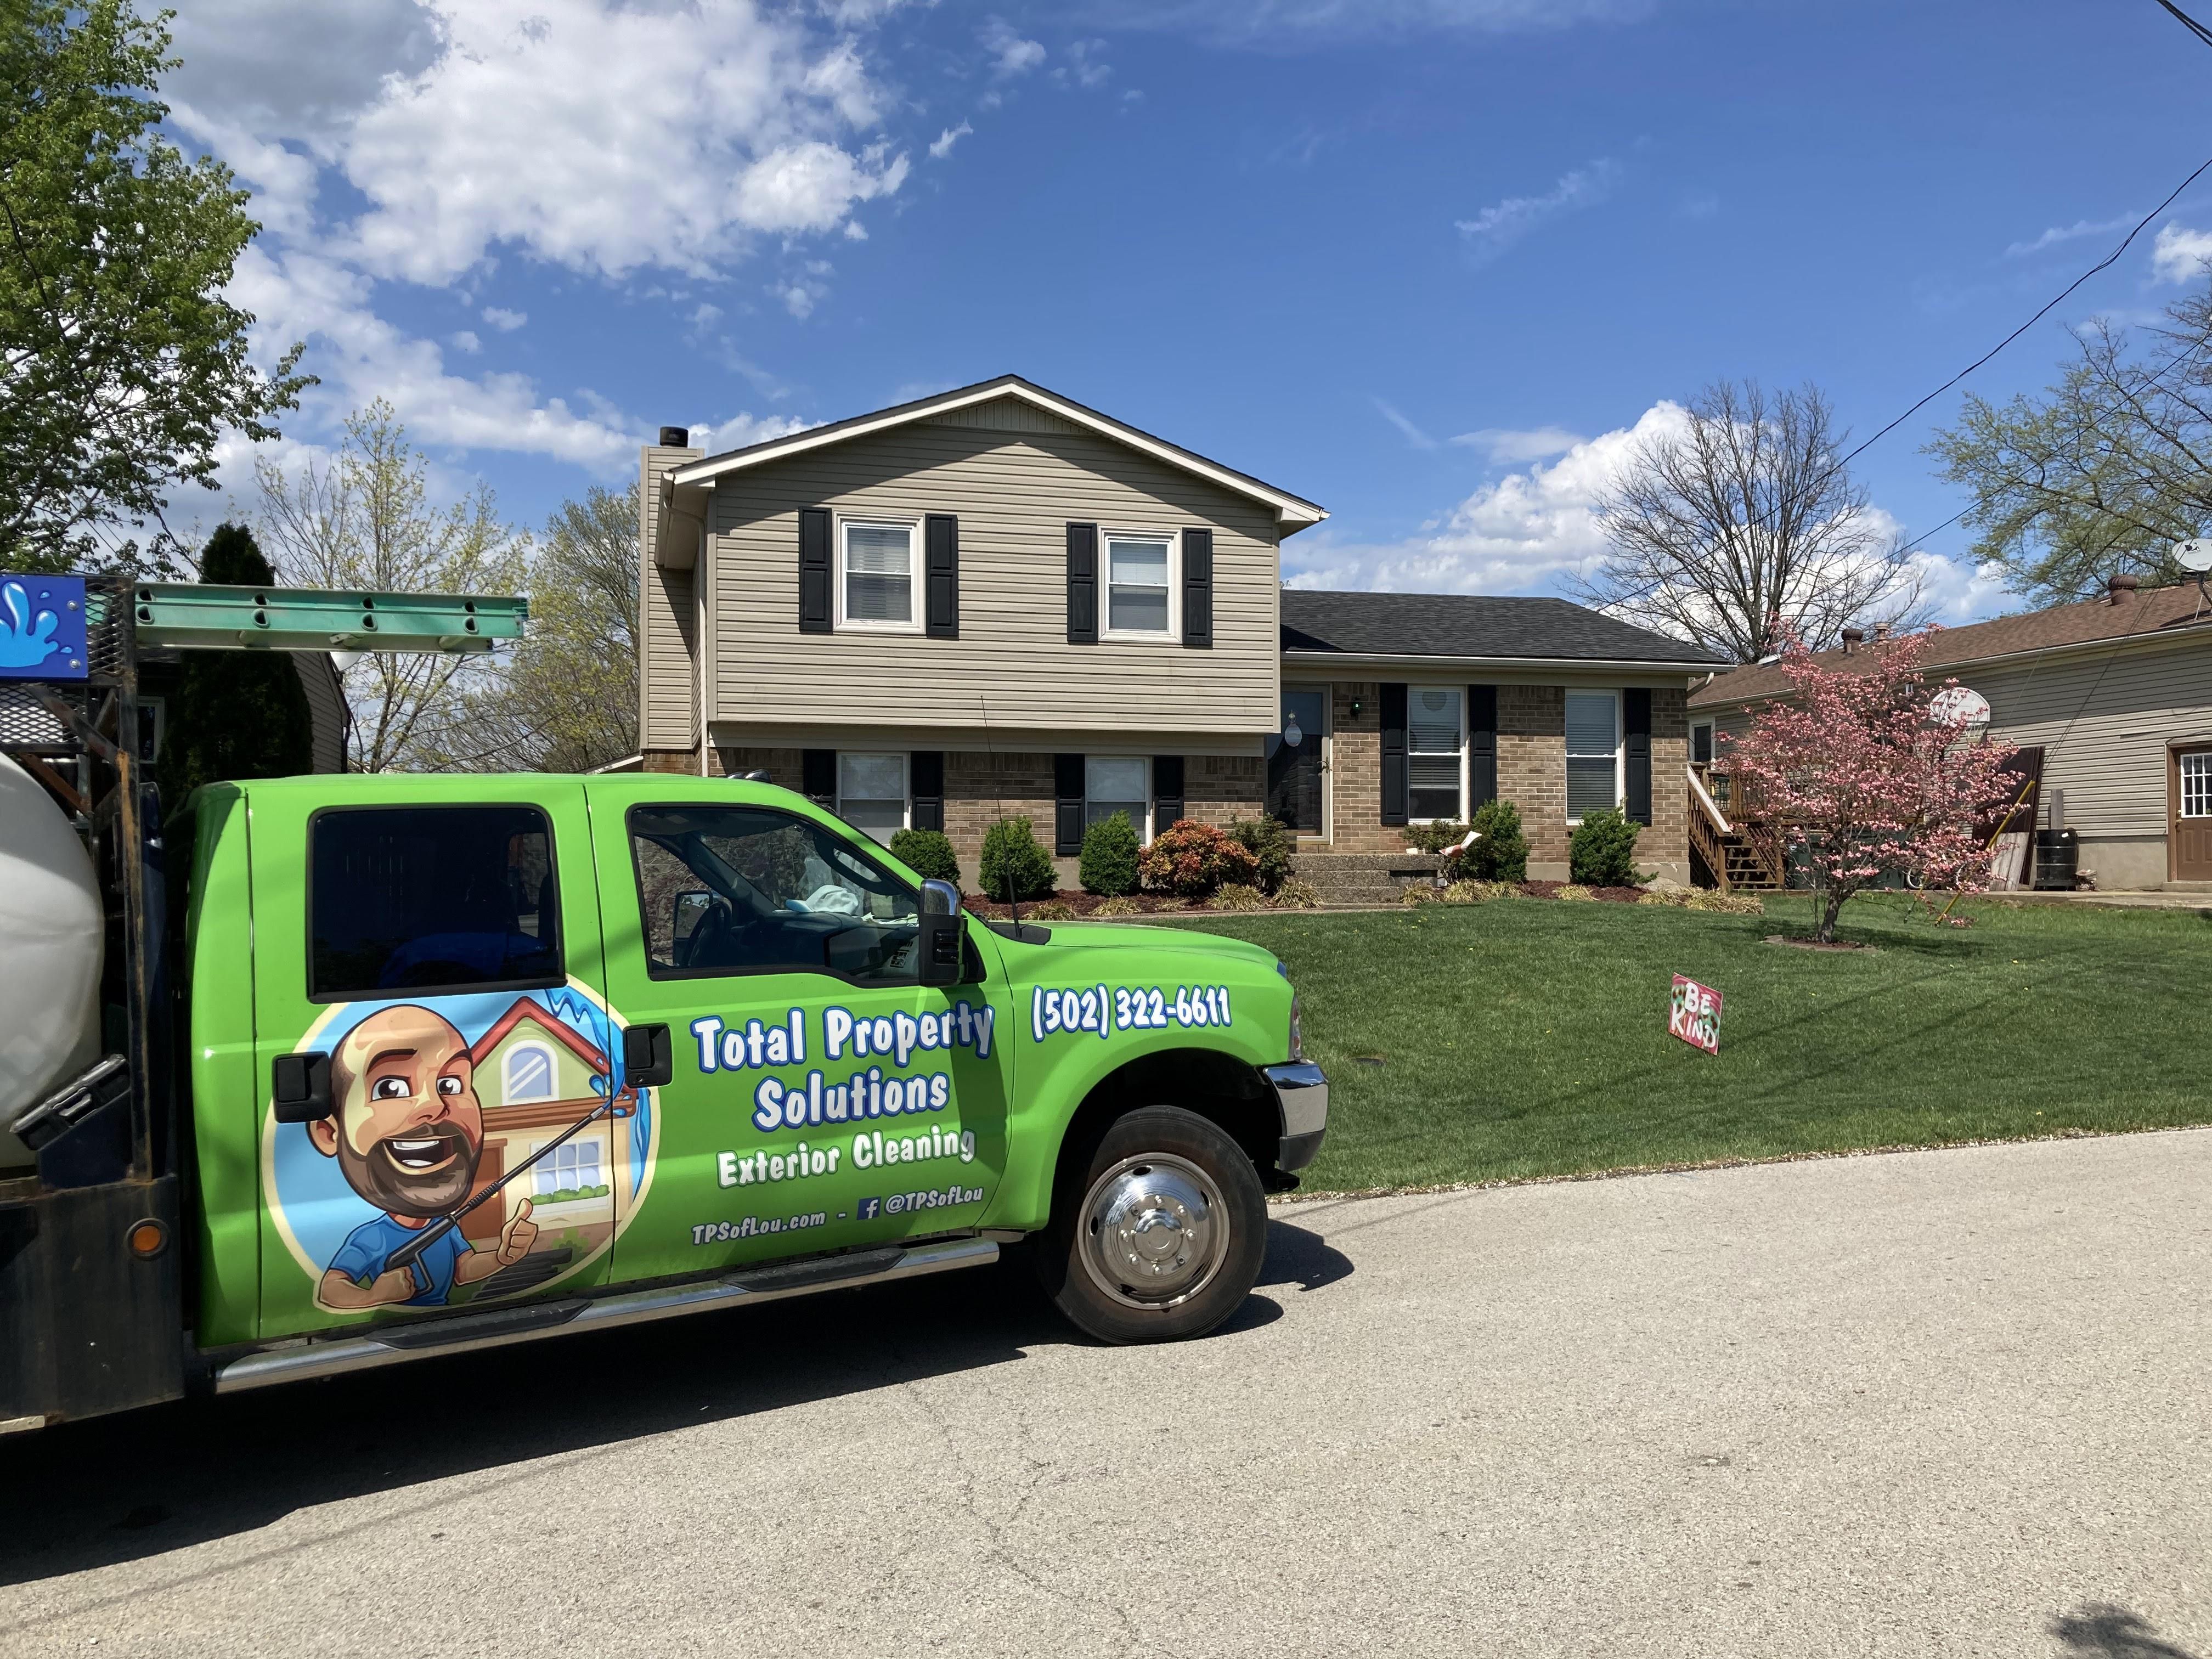 Home Softwash for Total Property Solutions in Saint Matthews, KY